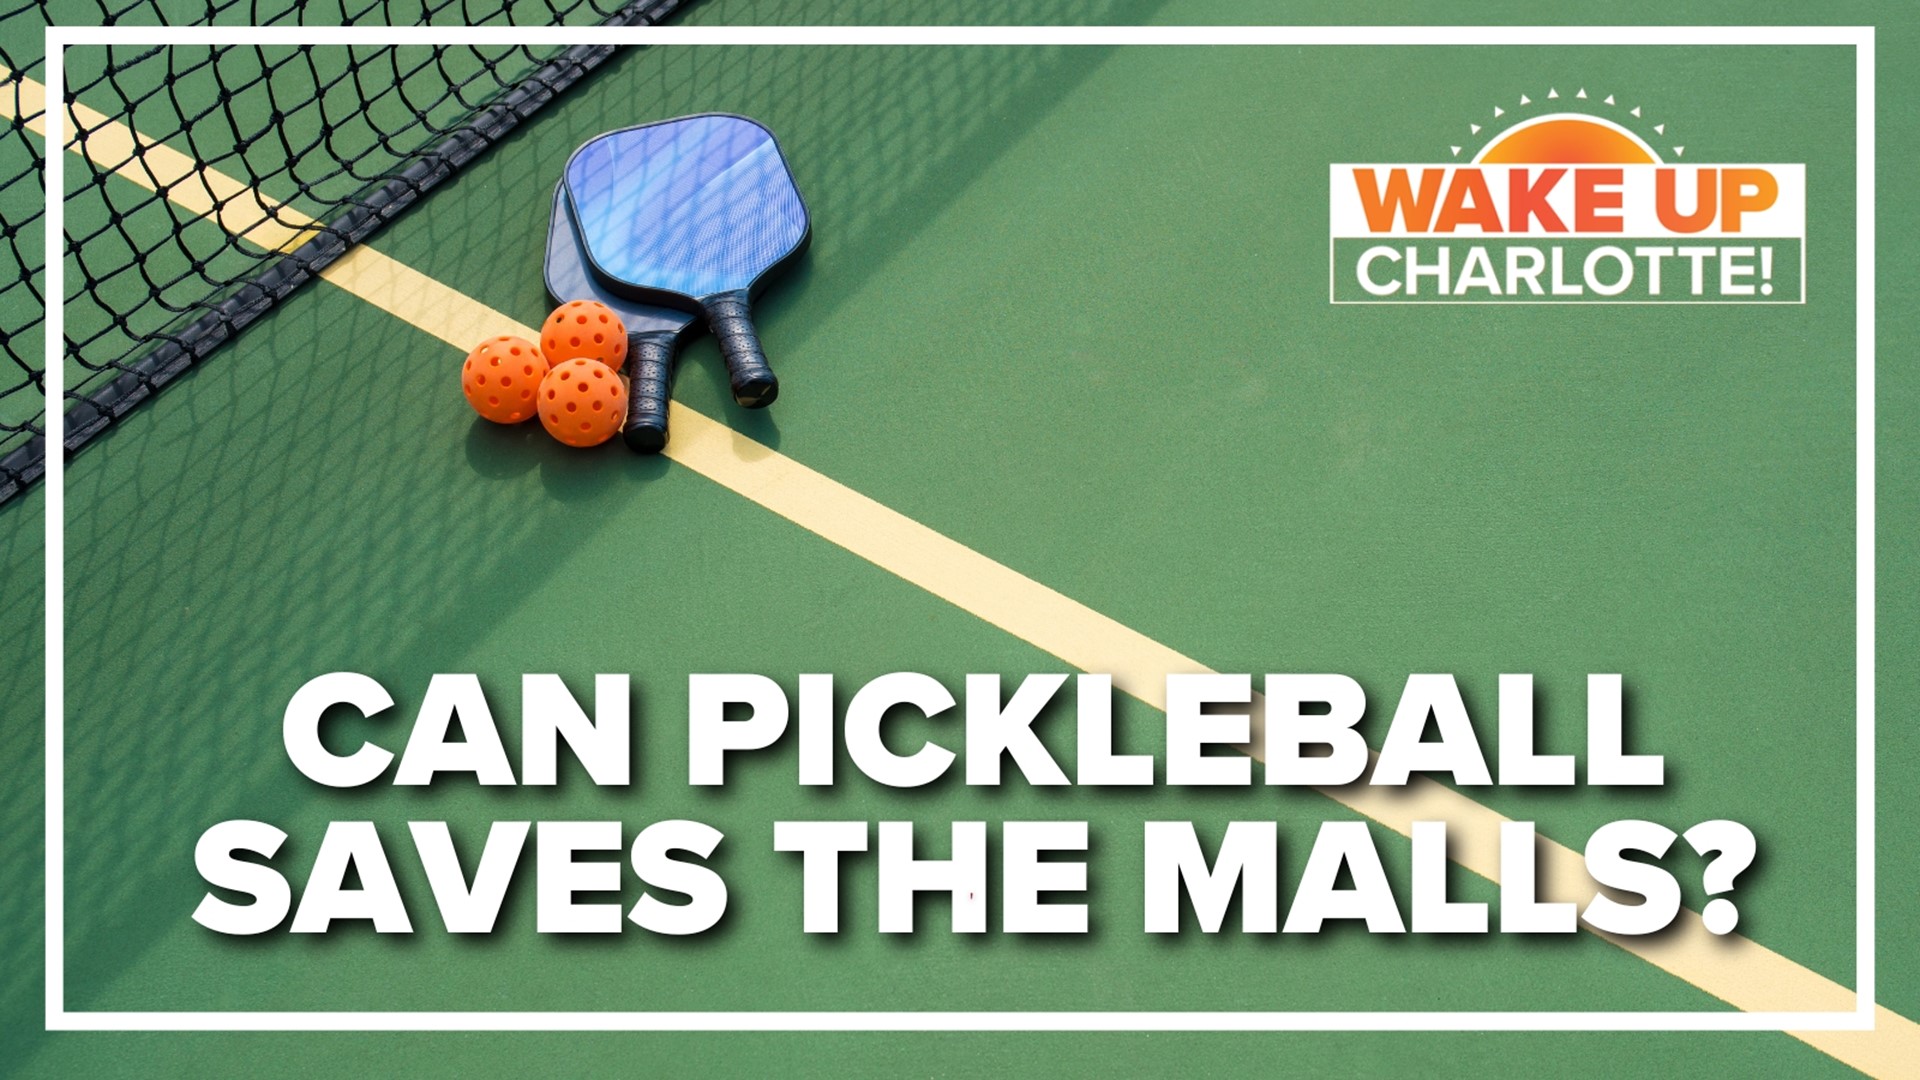 Pickleball, which combines elements of tennis, badminton and ping-pong began in 1965.